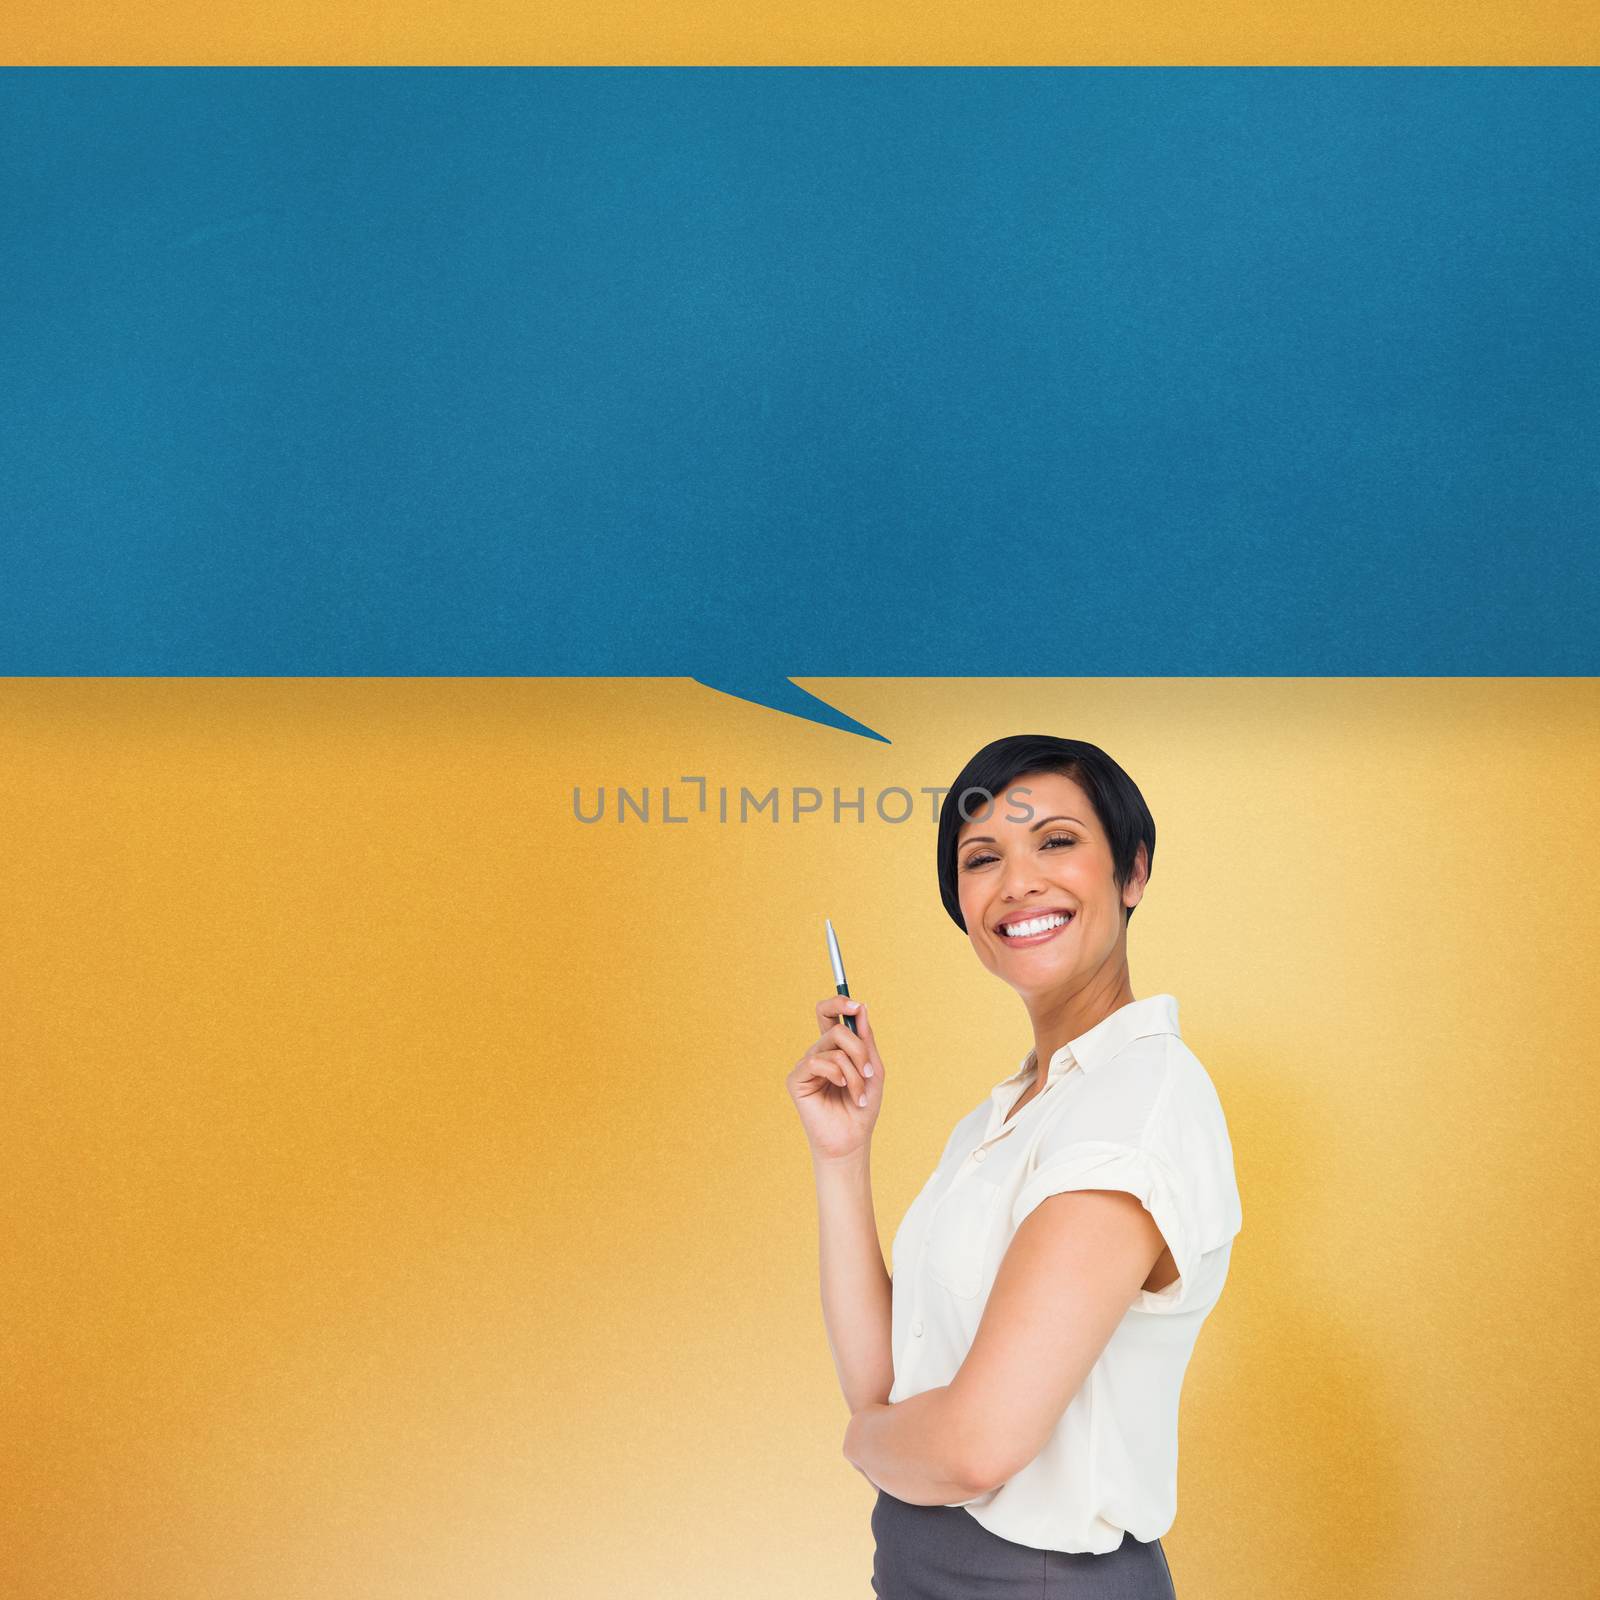 Thoughtful businesswoman with speech bubble against yellow background with vignette